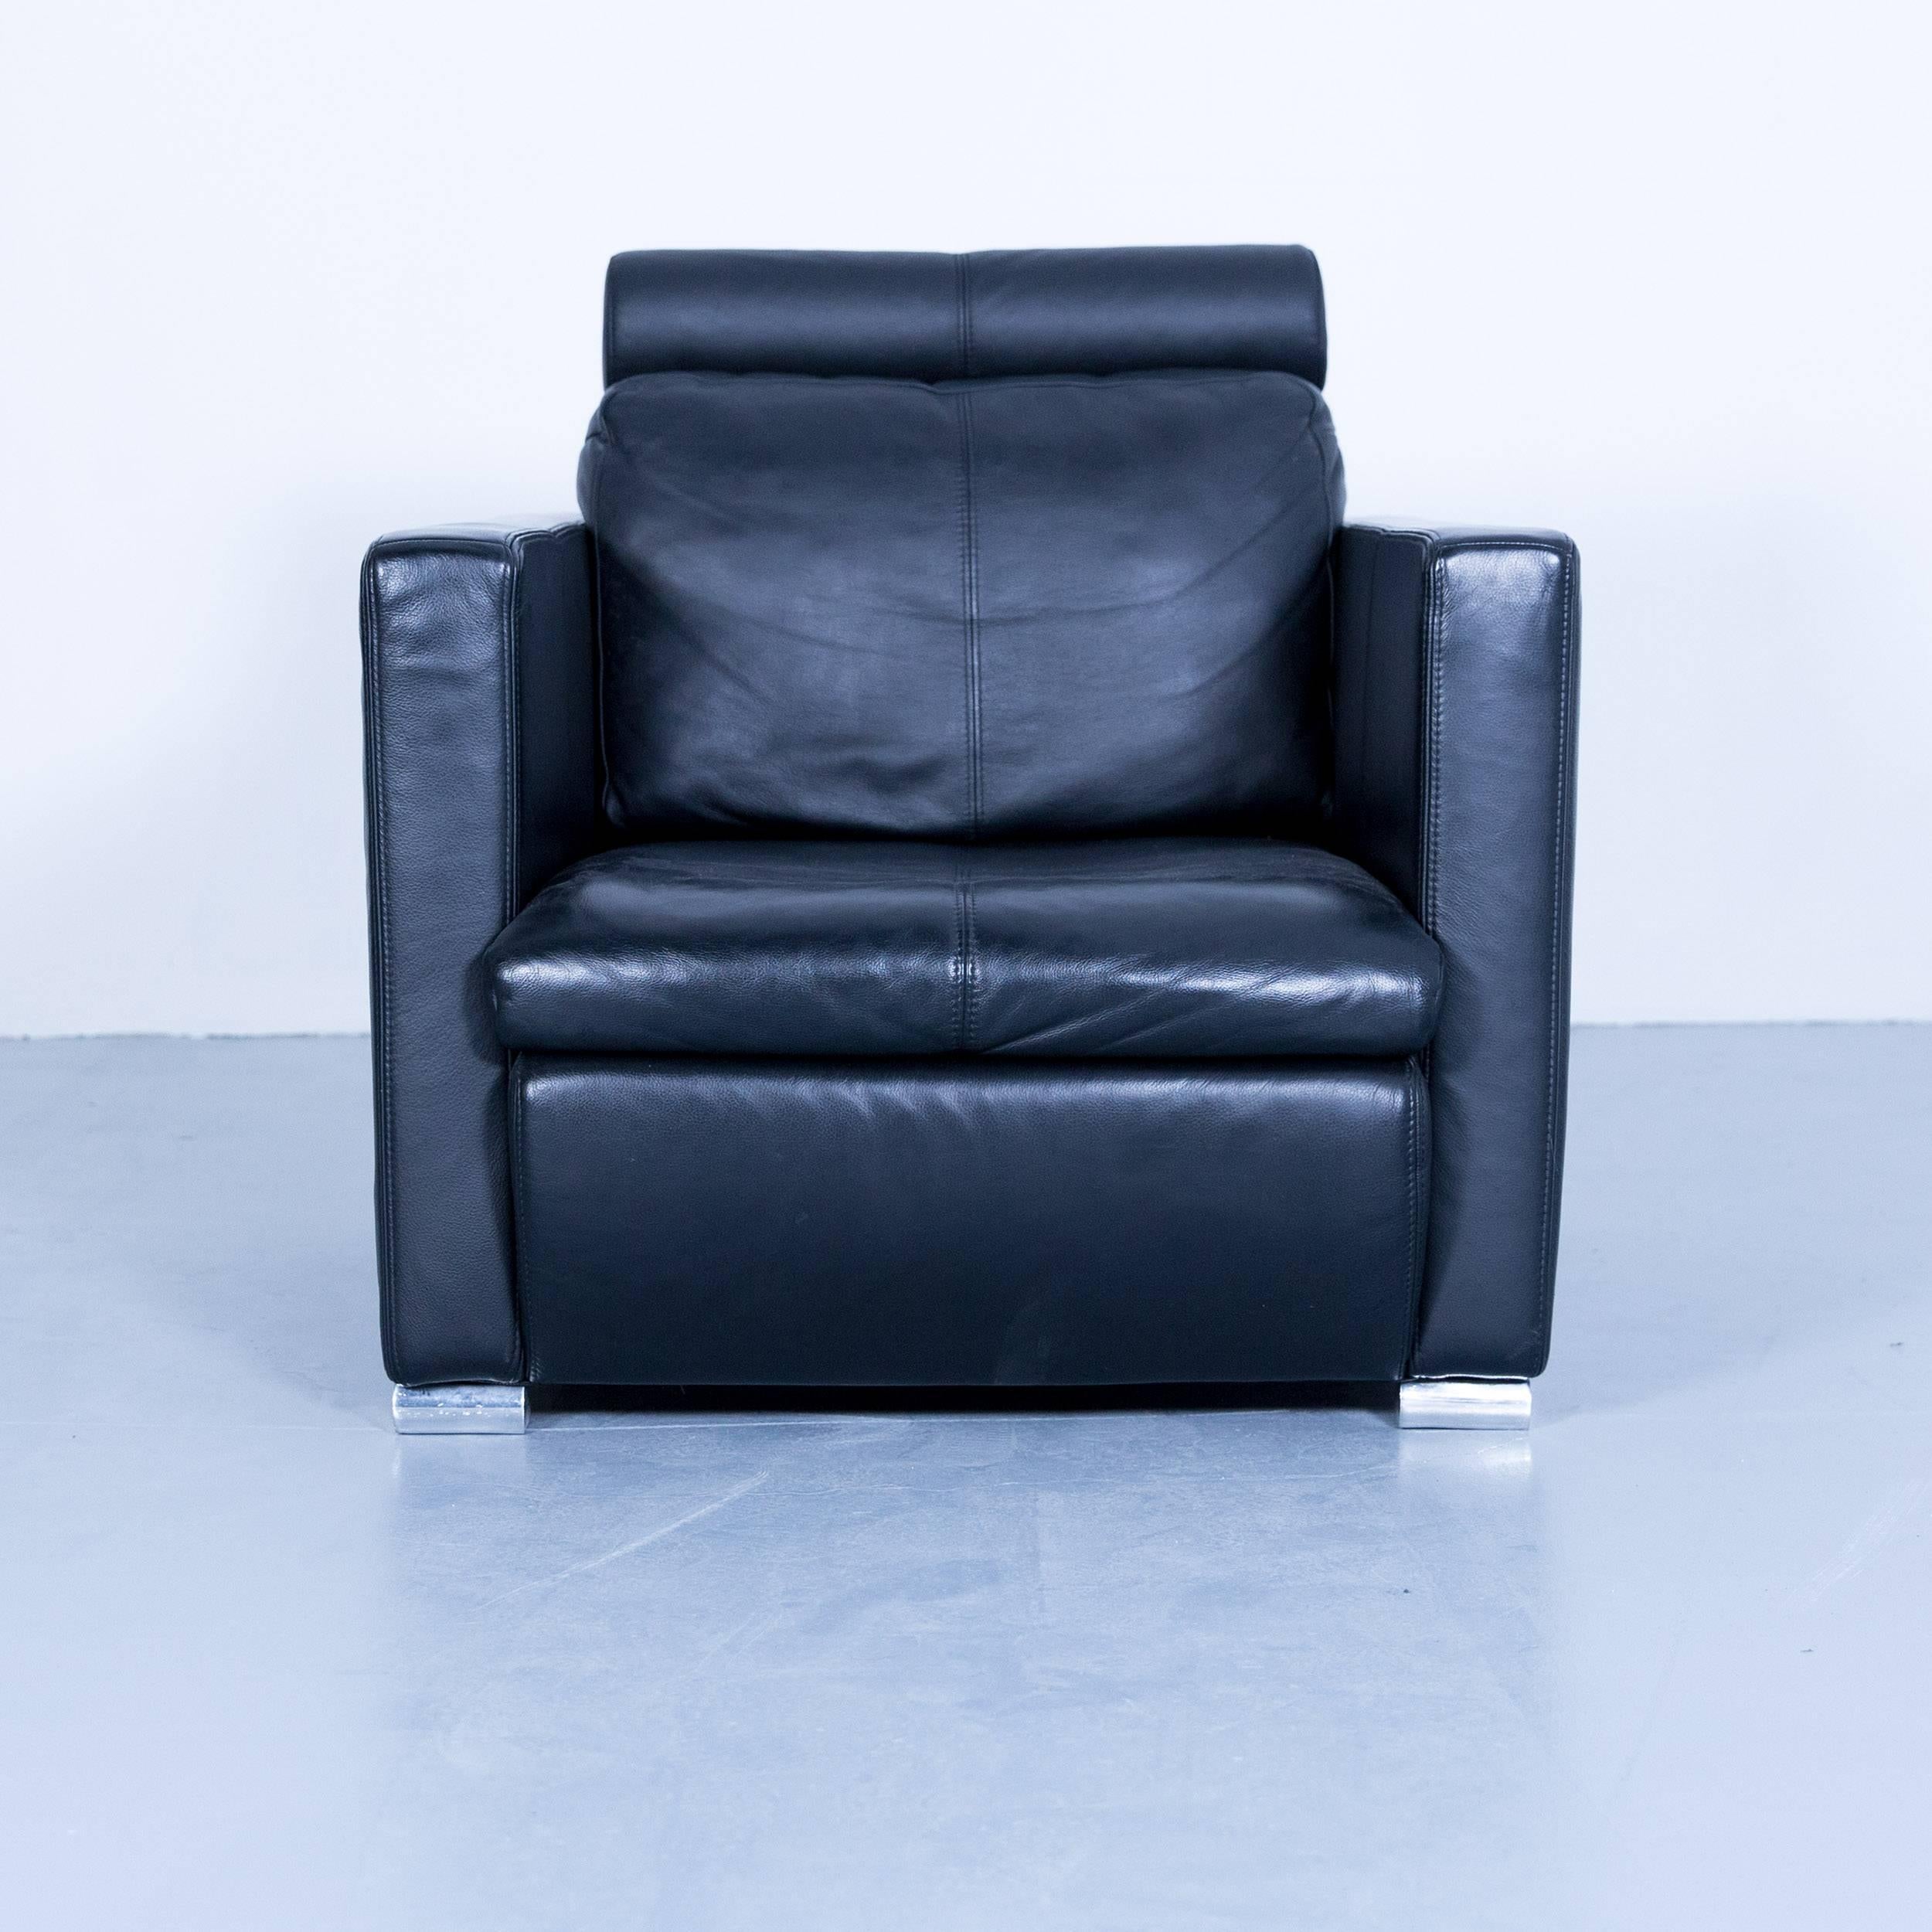 Designer chair leather black relax function couch modern minimal metal in a minimalistic and modern design, with convenient functions, made for pure comfort and flexibility.